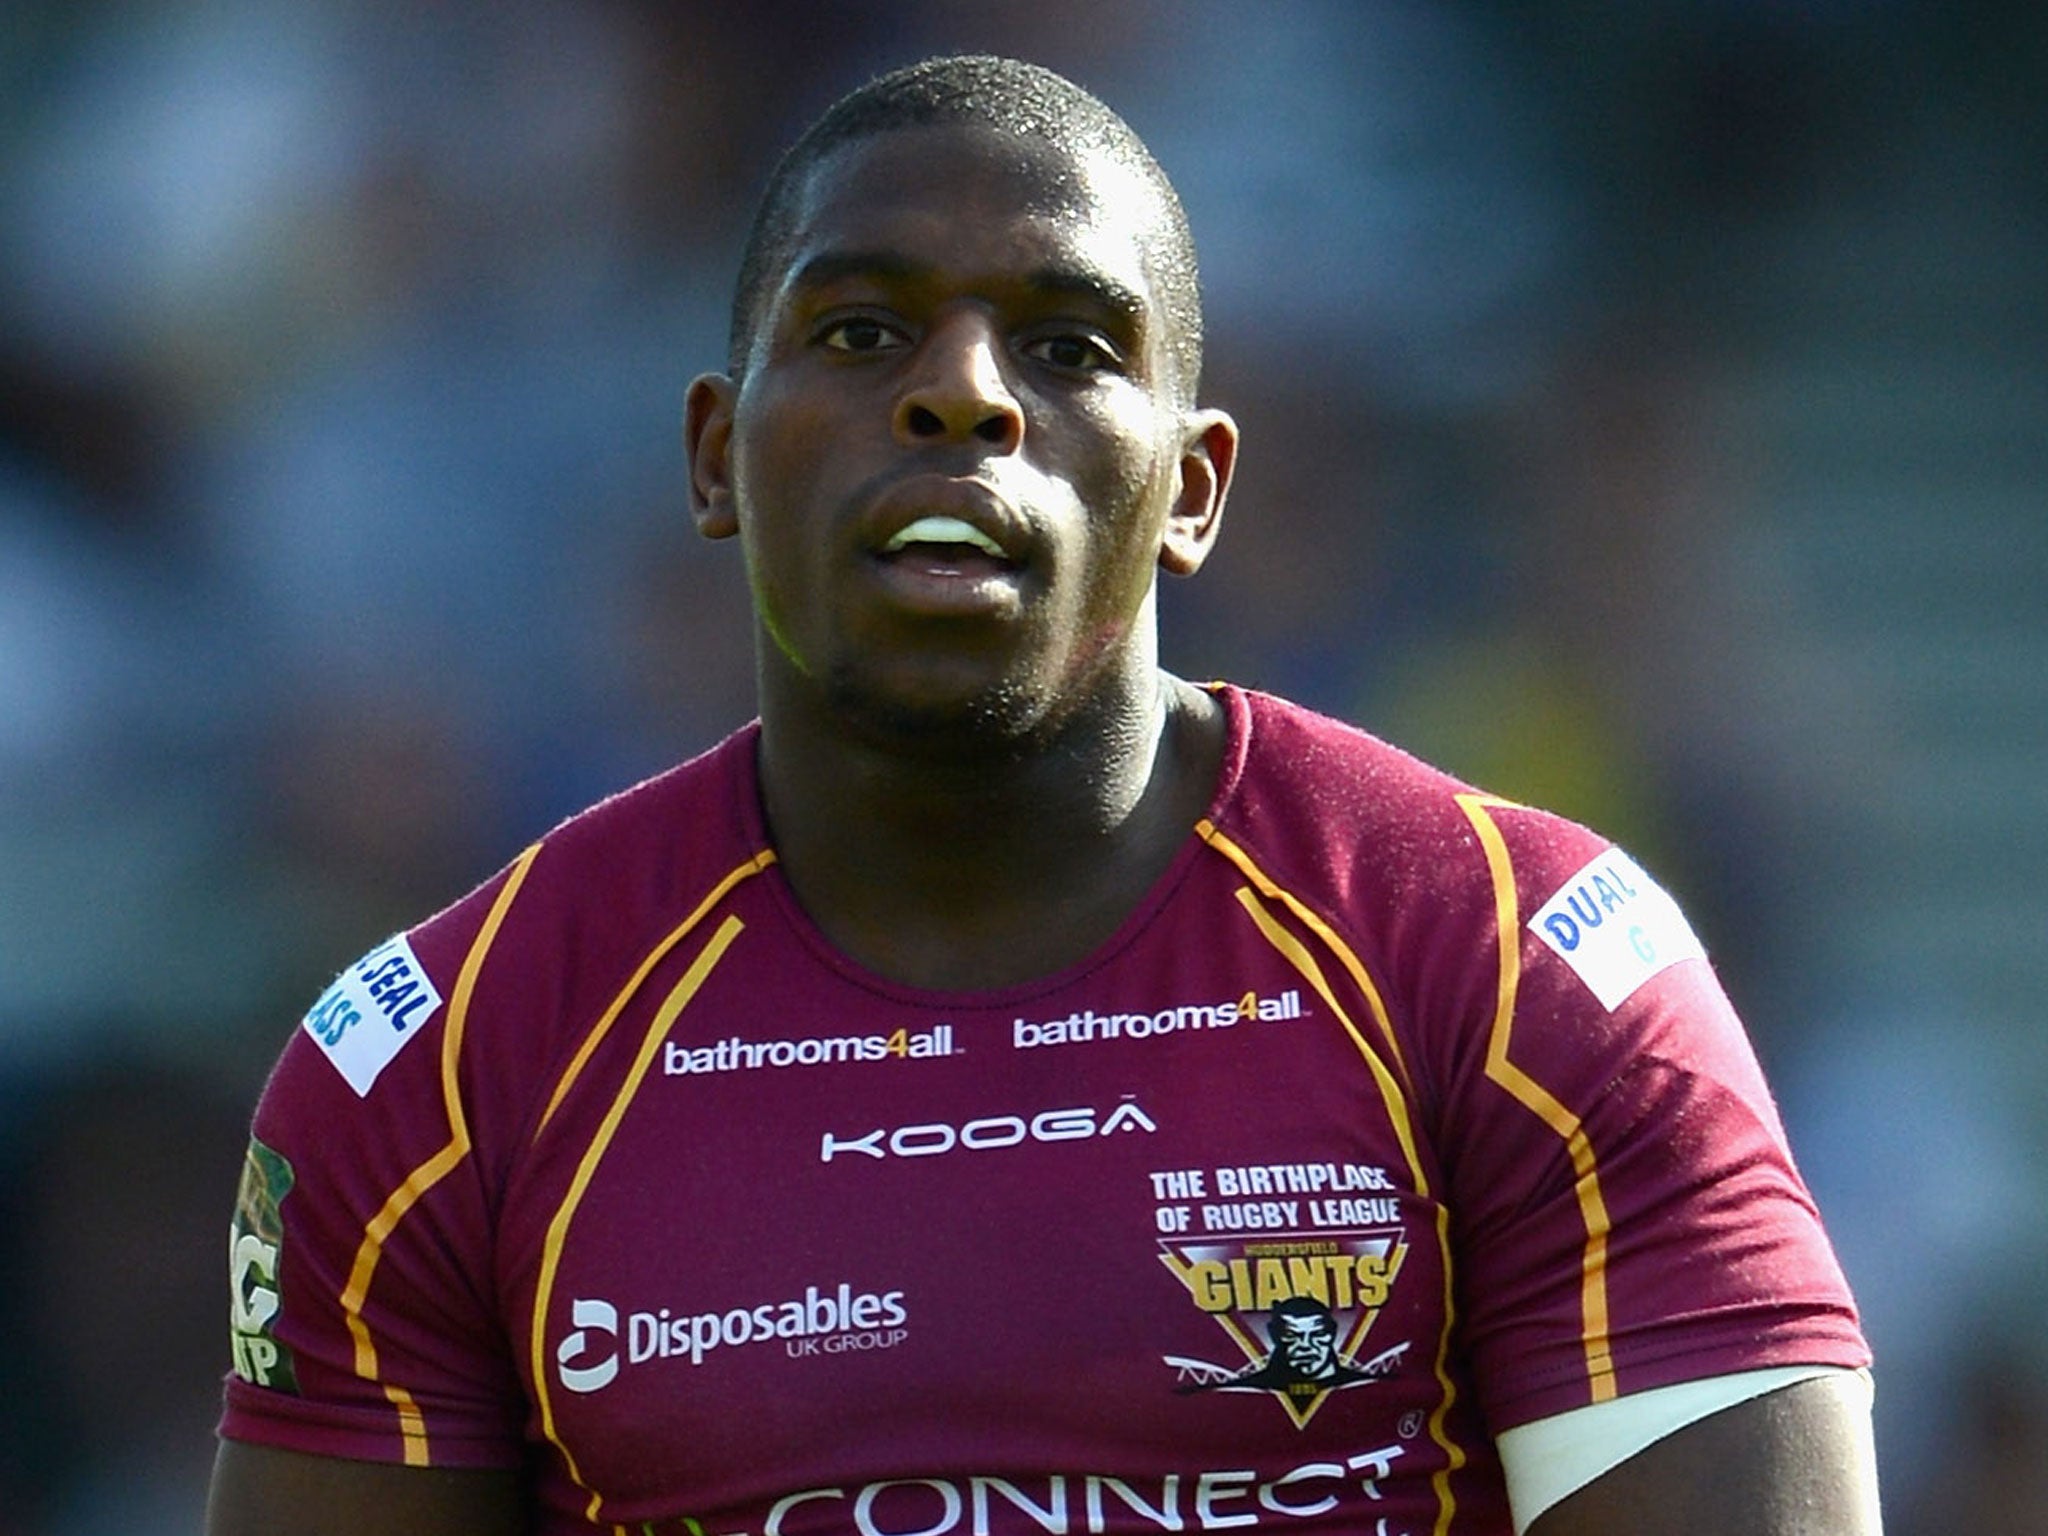 Double cross: Jermaine McGillvary scored two tries for the Giants